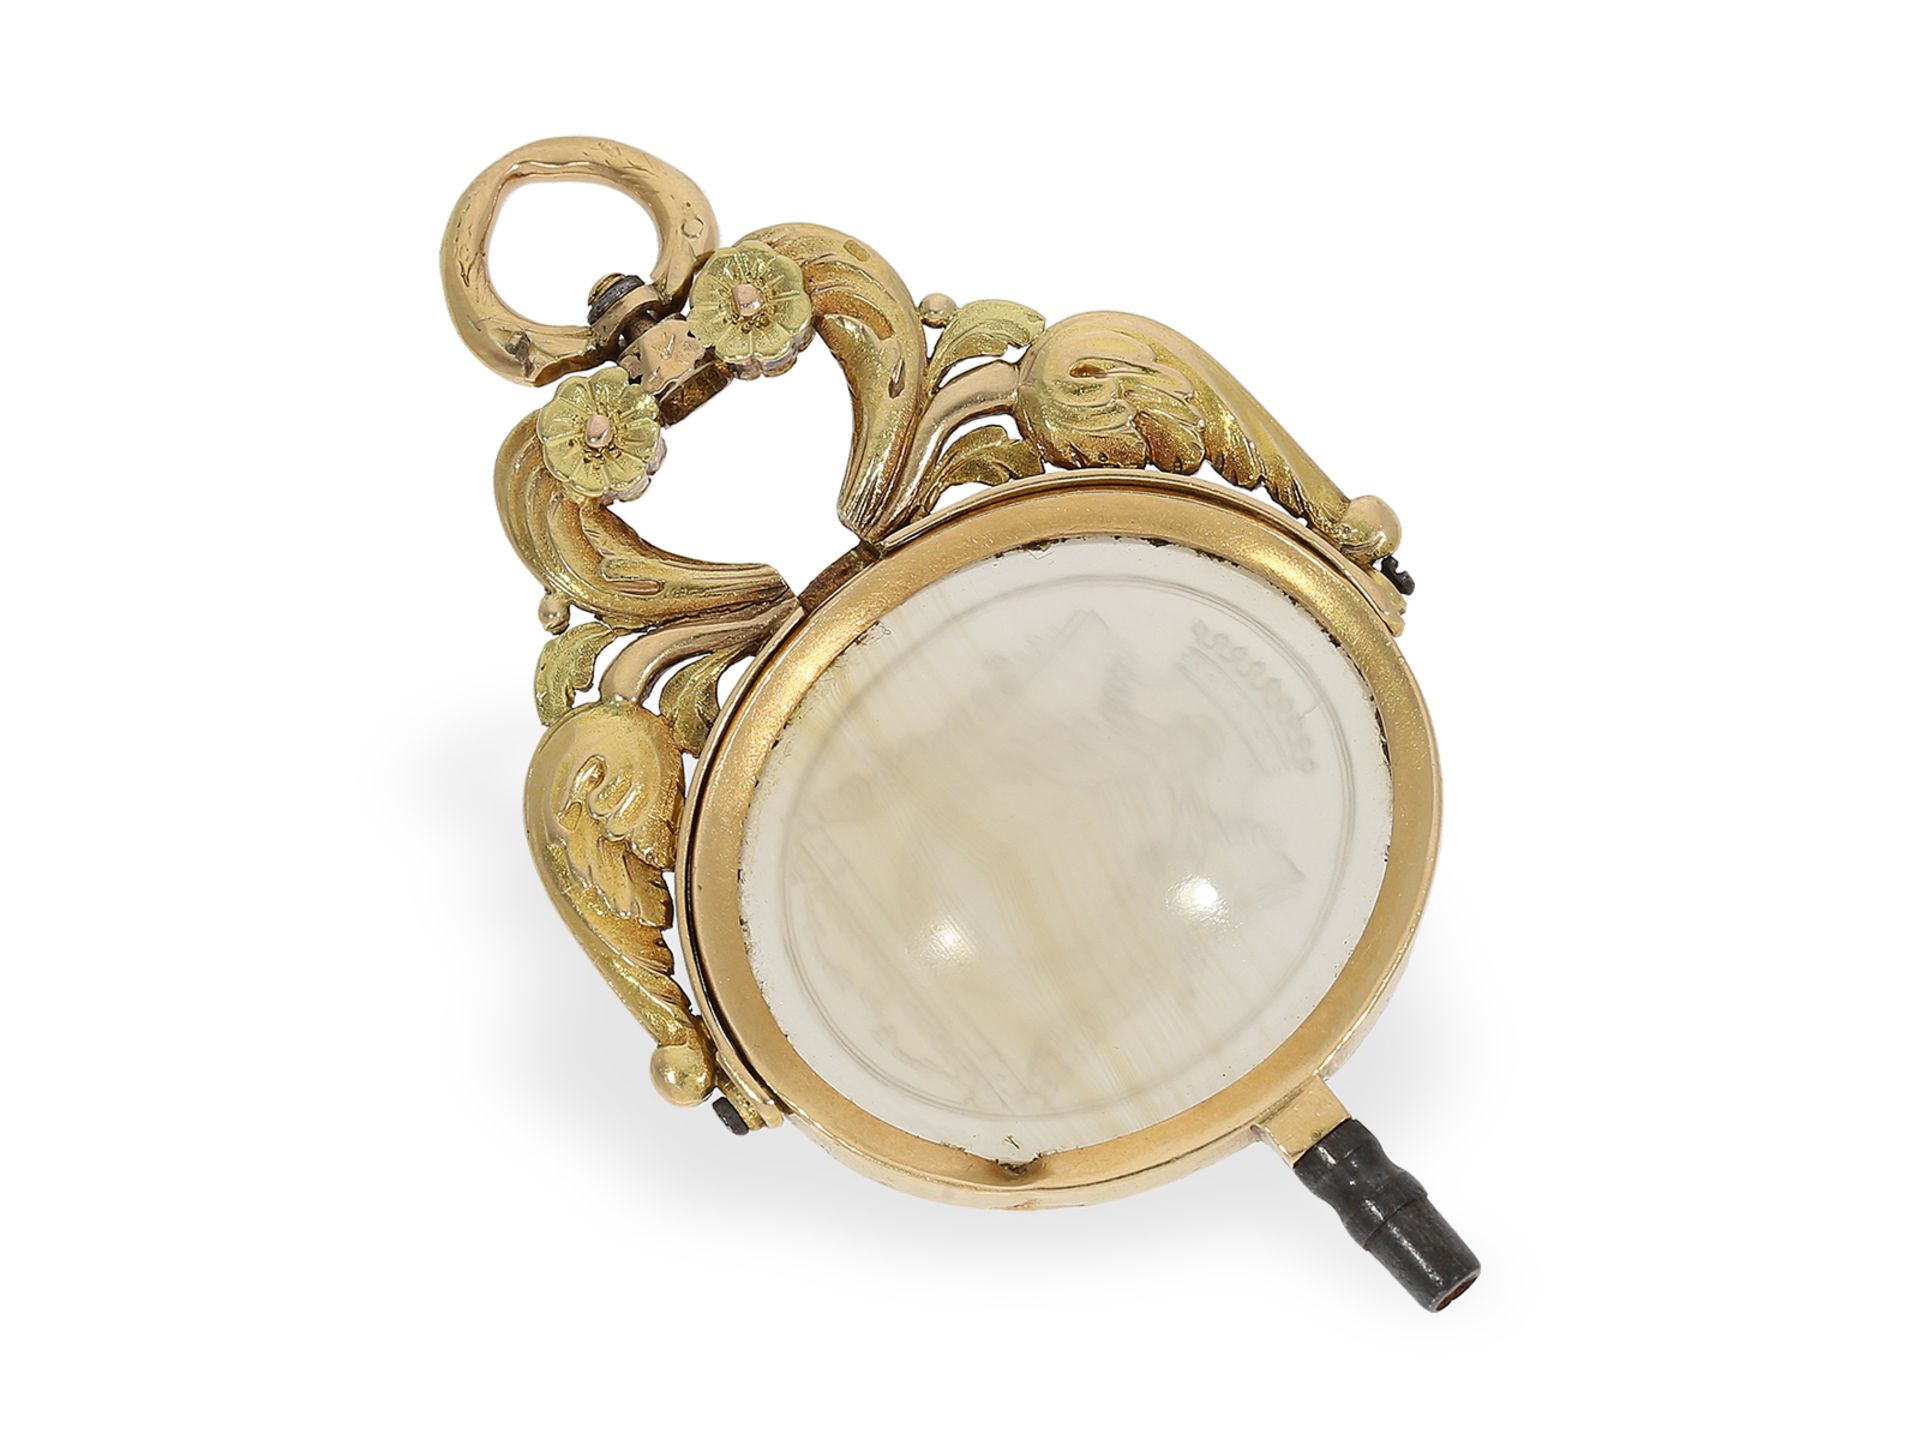 Watch key: large gold splendour key with agate noble intaglio, ca. 1820 - Image 2 of 2